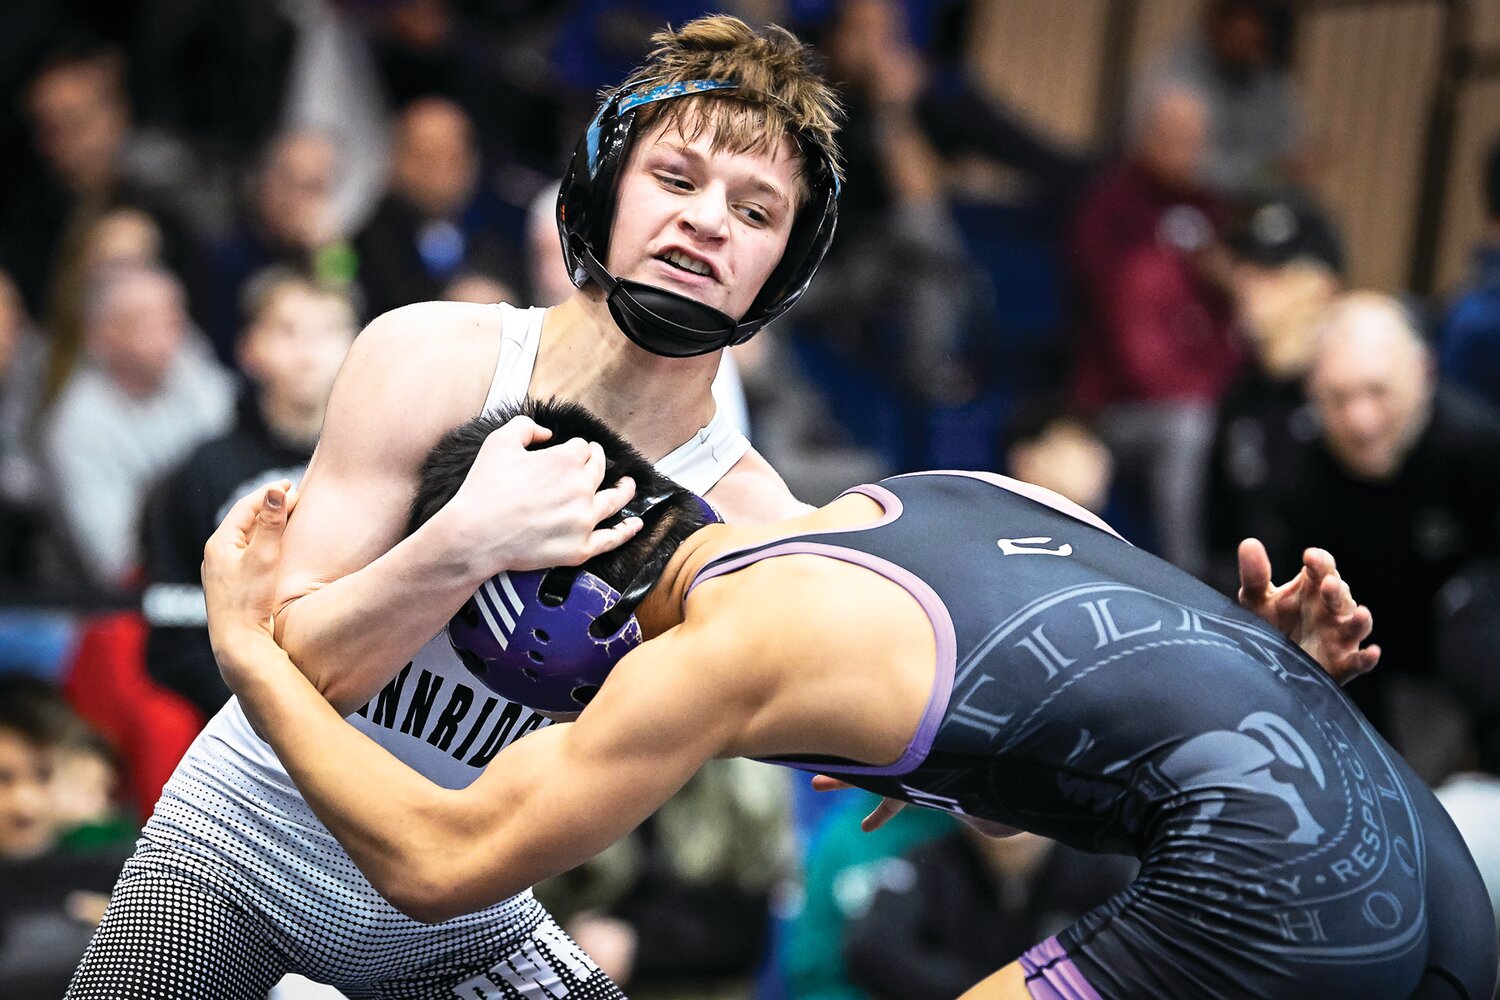 Pennridge’s Colby Martinelli during a 107-pound semifinal 7-1 victory against Carter Shin of Chantilly High School.